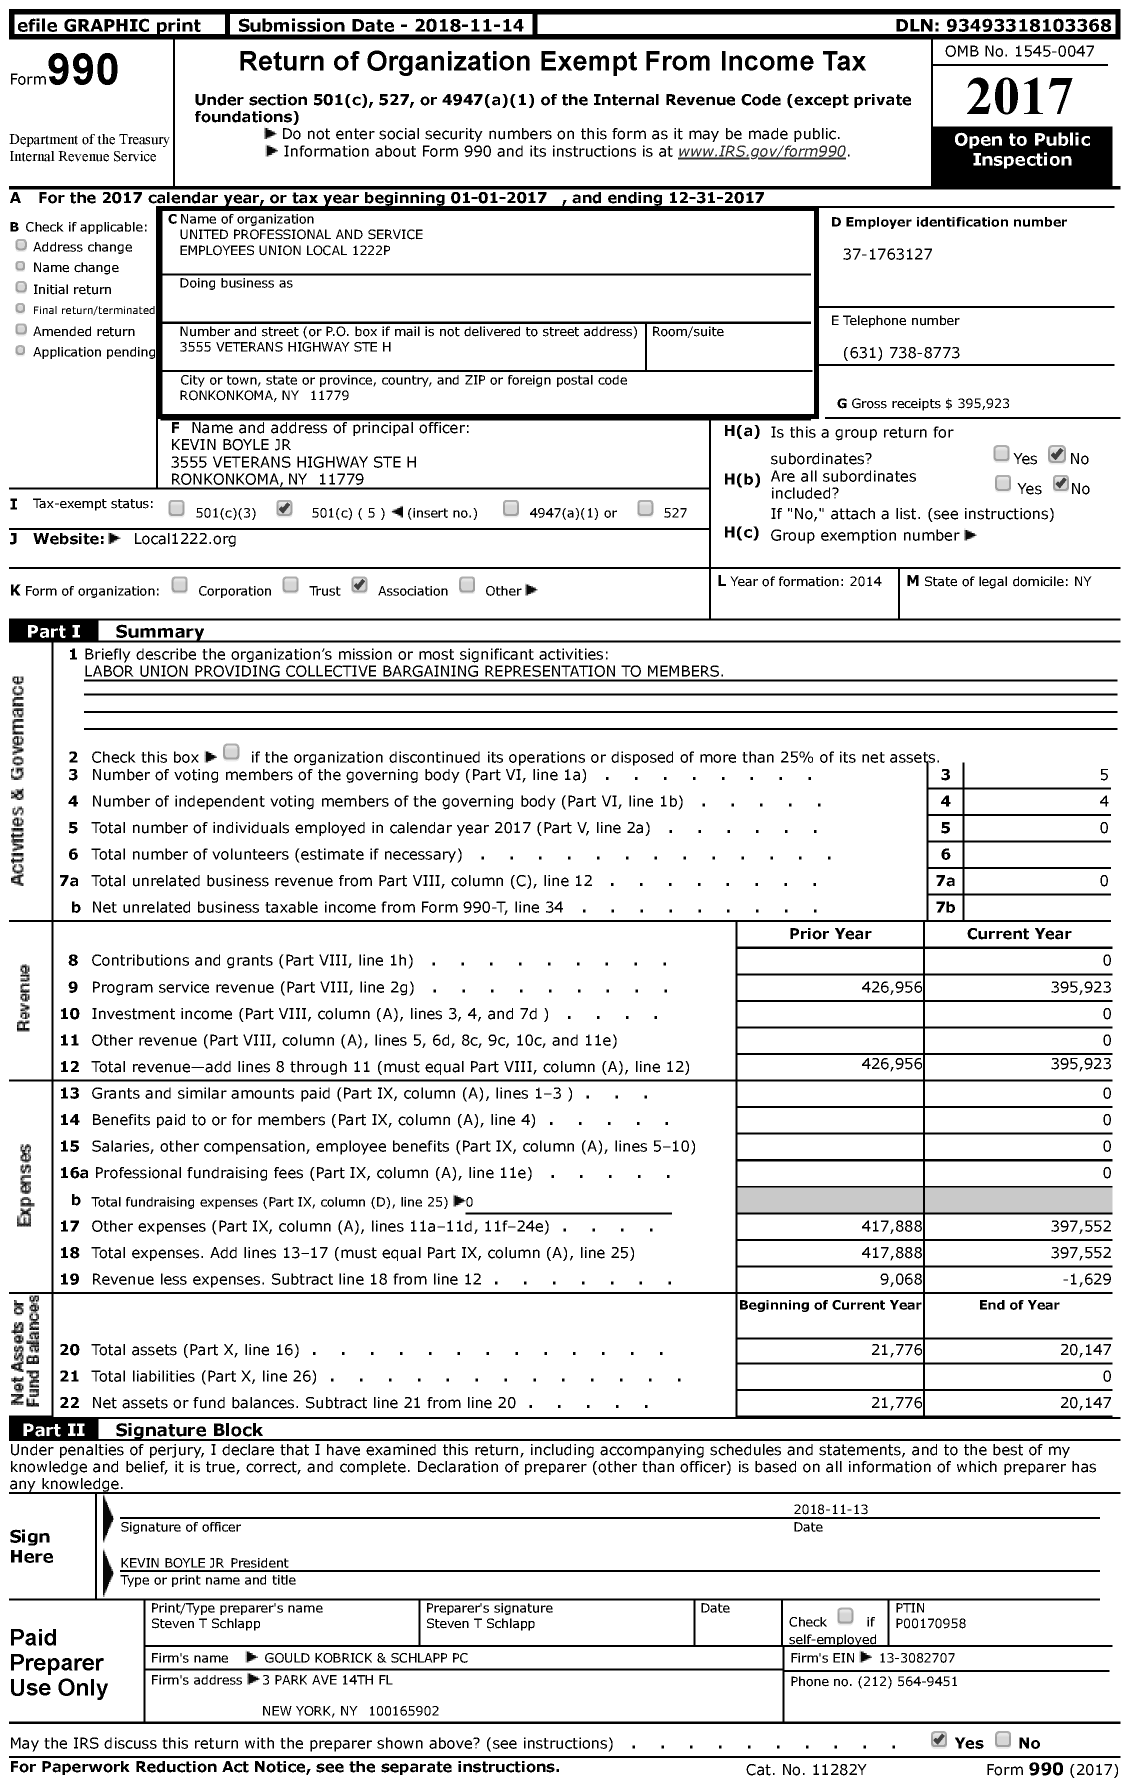 Image of first page of 2017 Form 990 for United Professional and Service Employees Union Local 1222